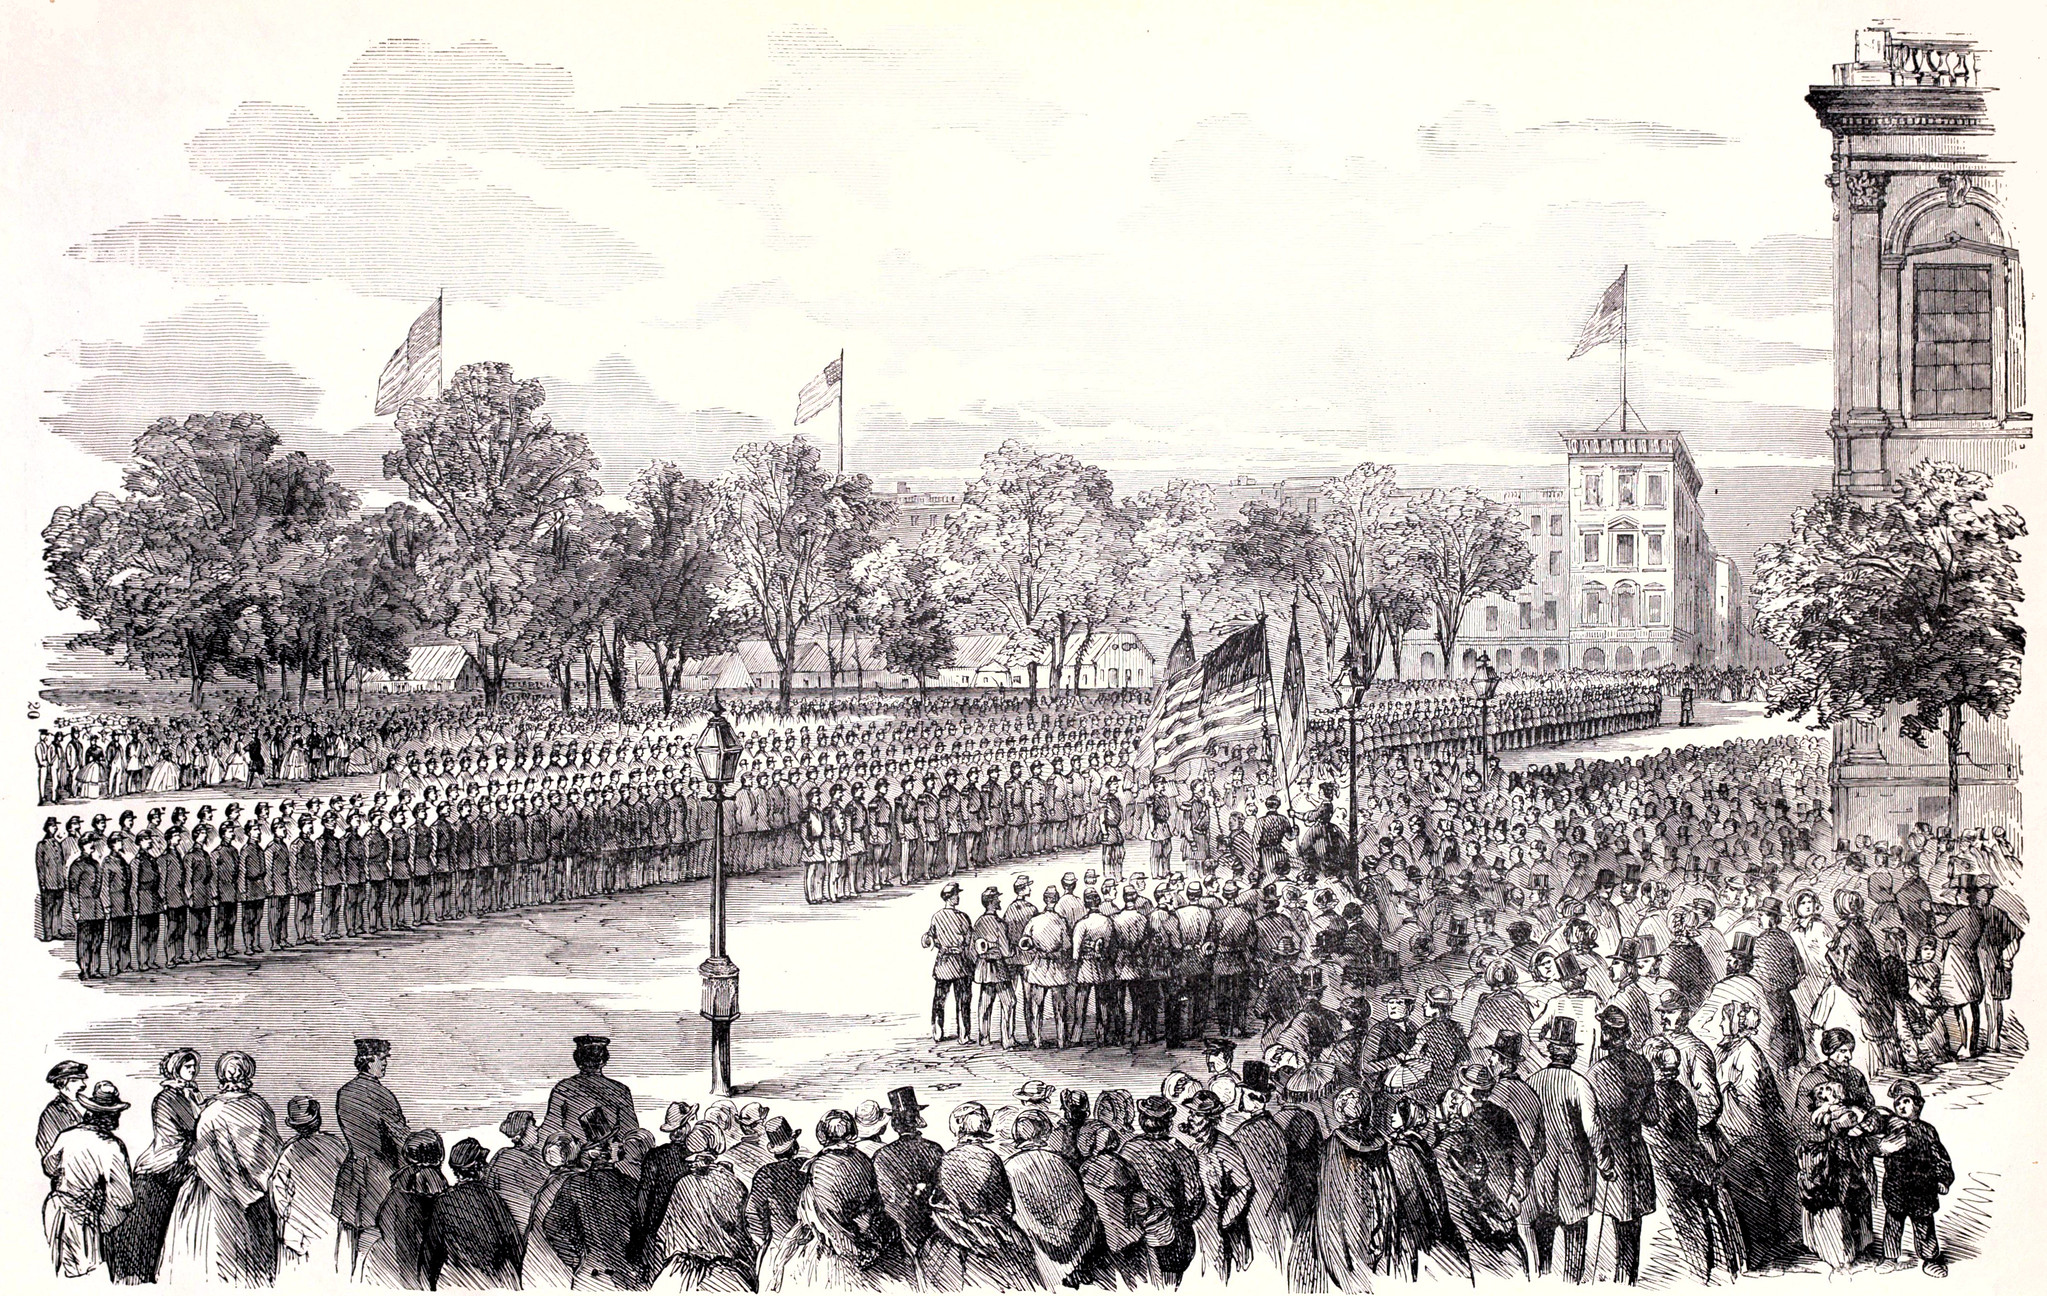 The German Regiment, Steuben Volunteers, Col. John E. Bendix Commanding, Receiving the American and Steuben Flags in Front of the City Hall, New York, May 24th, 1861